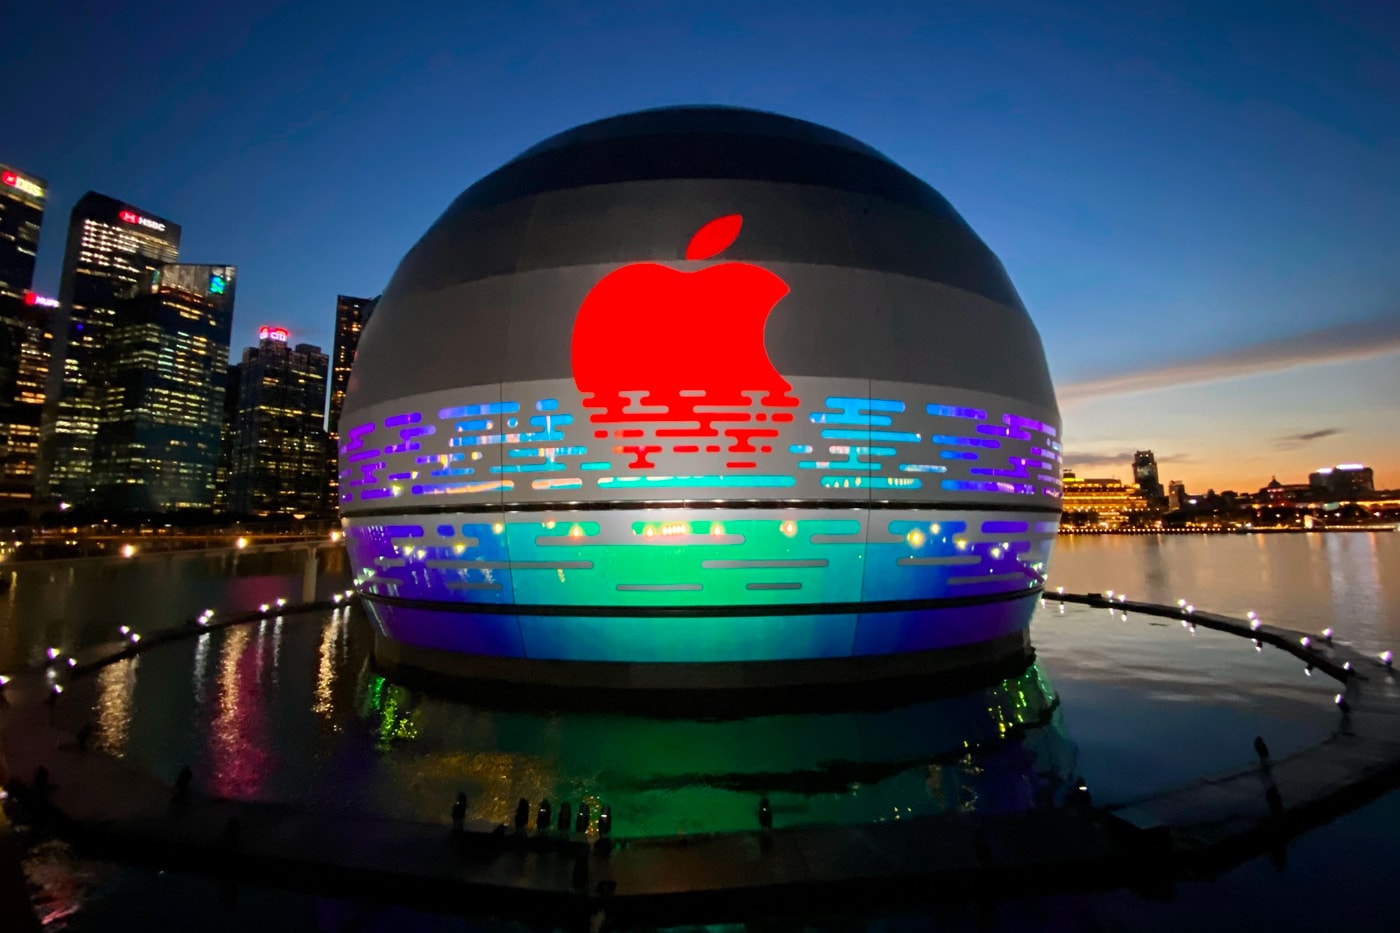 Apple Store Singapore Marina Bay Sands Now Open appointment only 114 glass dome sphere structure retail location facade building architecture